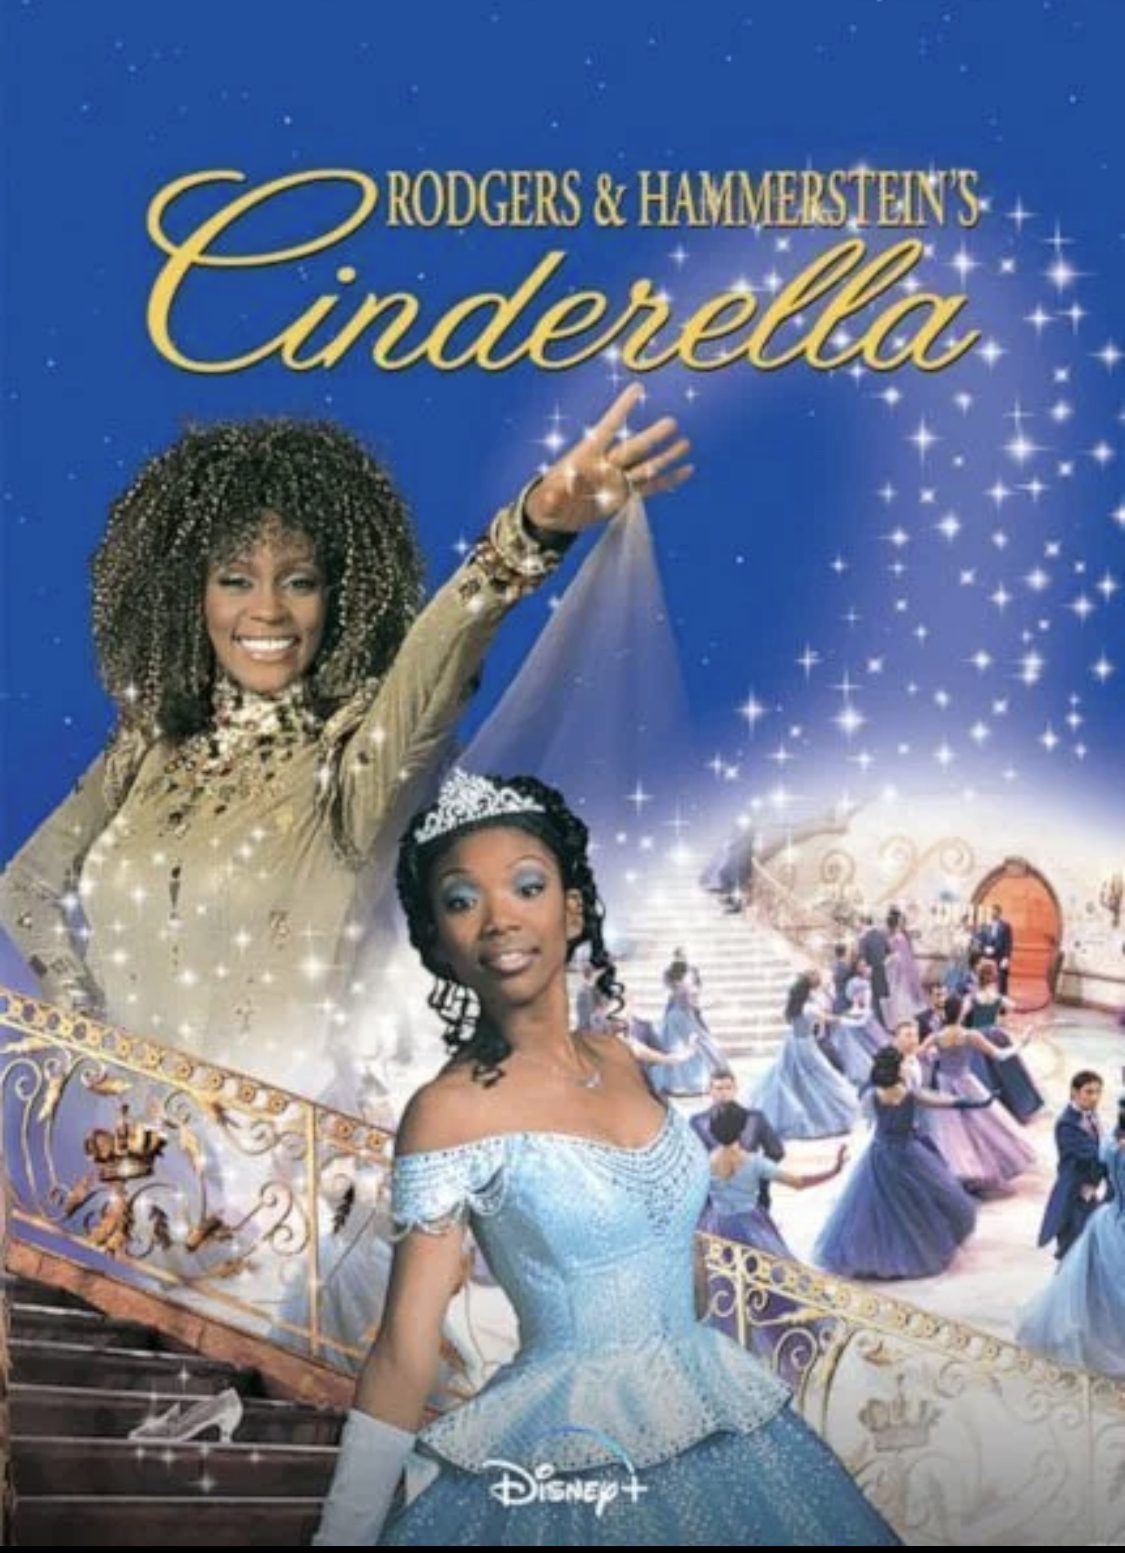  ‘Cinderella’ Starring Brandy & Whitney Houston Officially Coming To Disney+